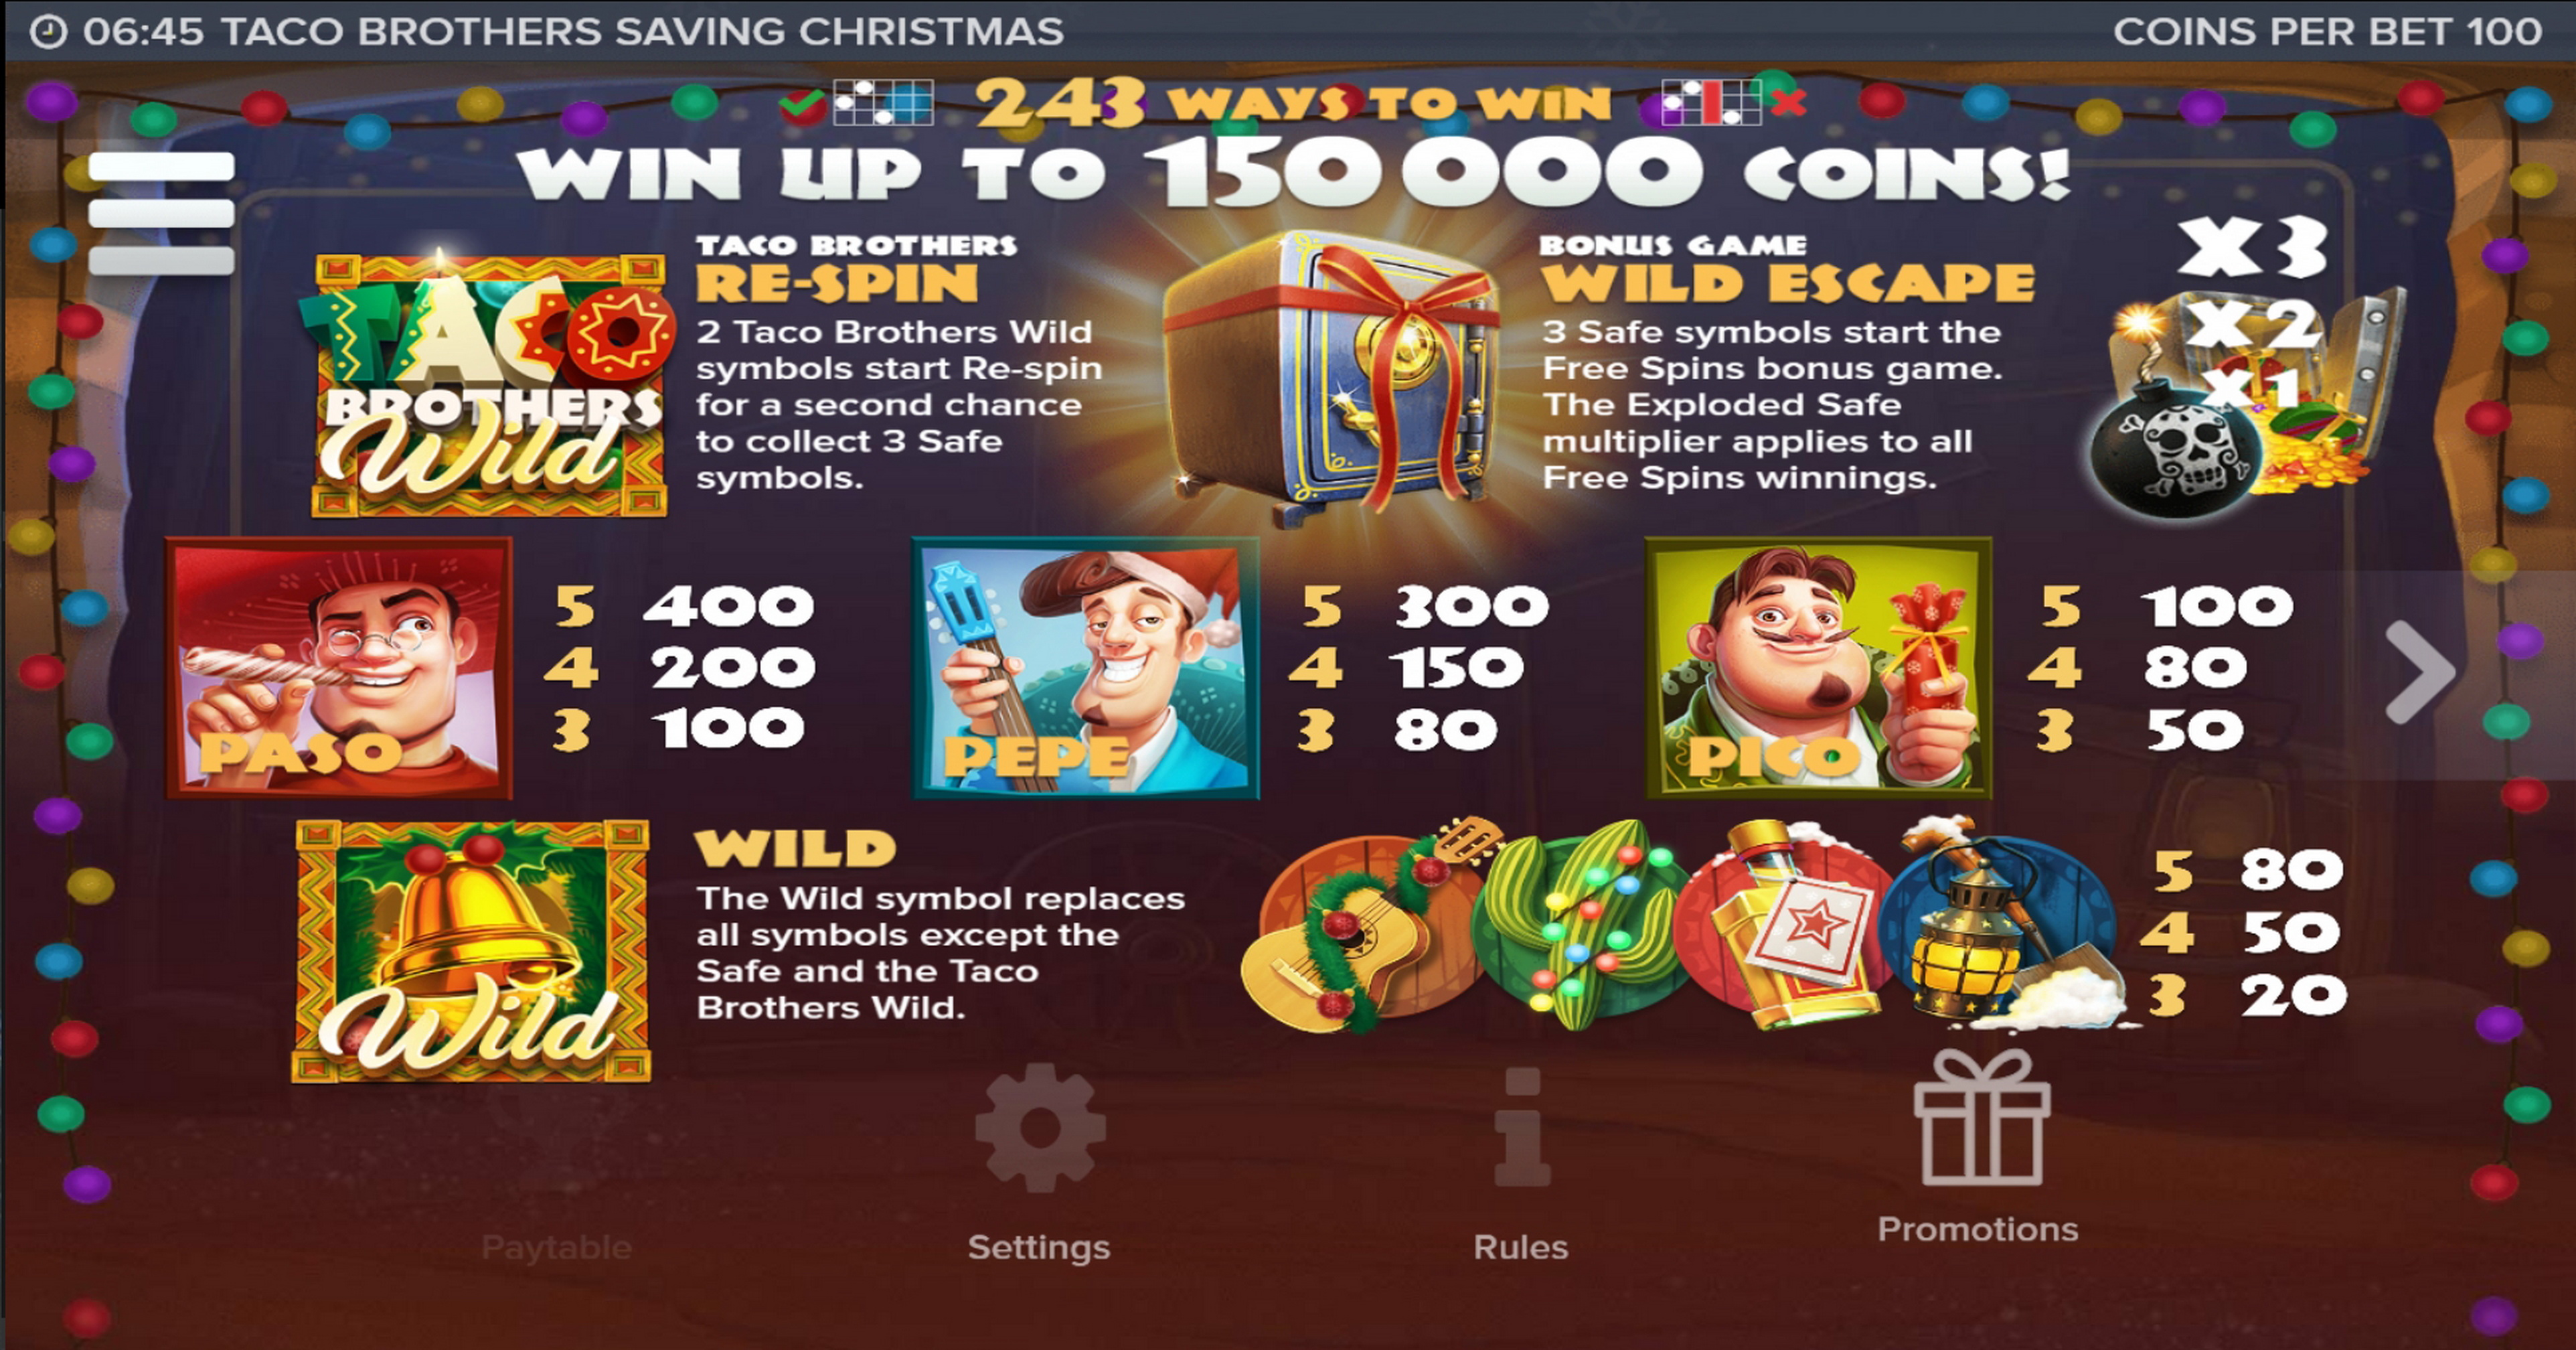 Info of Taco Brothers Saving Christmas Slot Game by ELK Studios